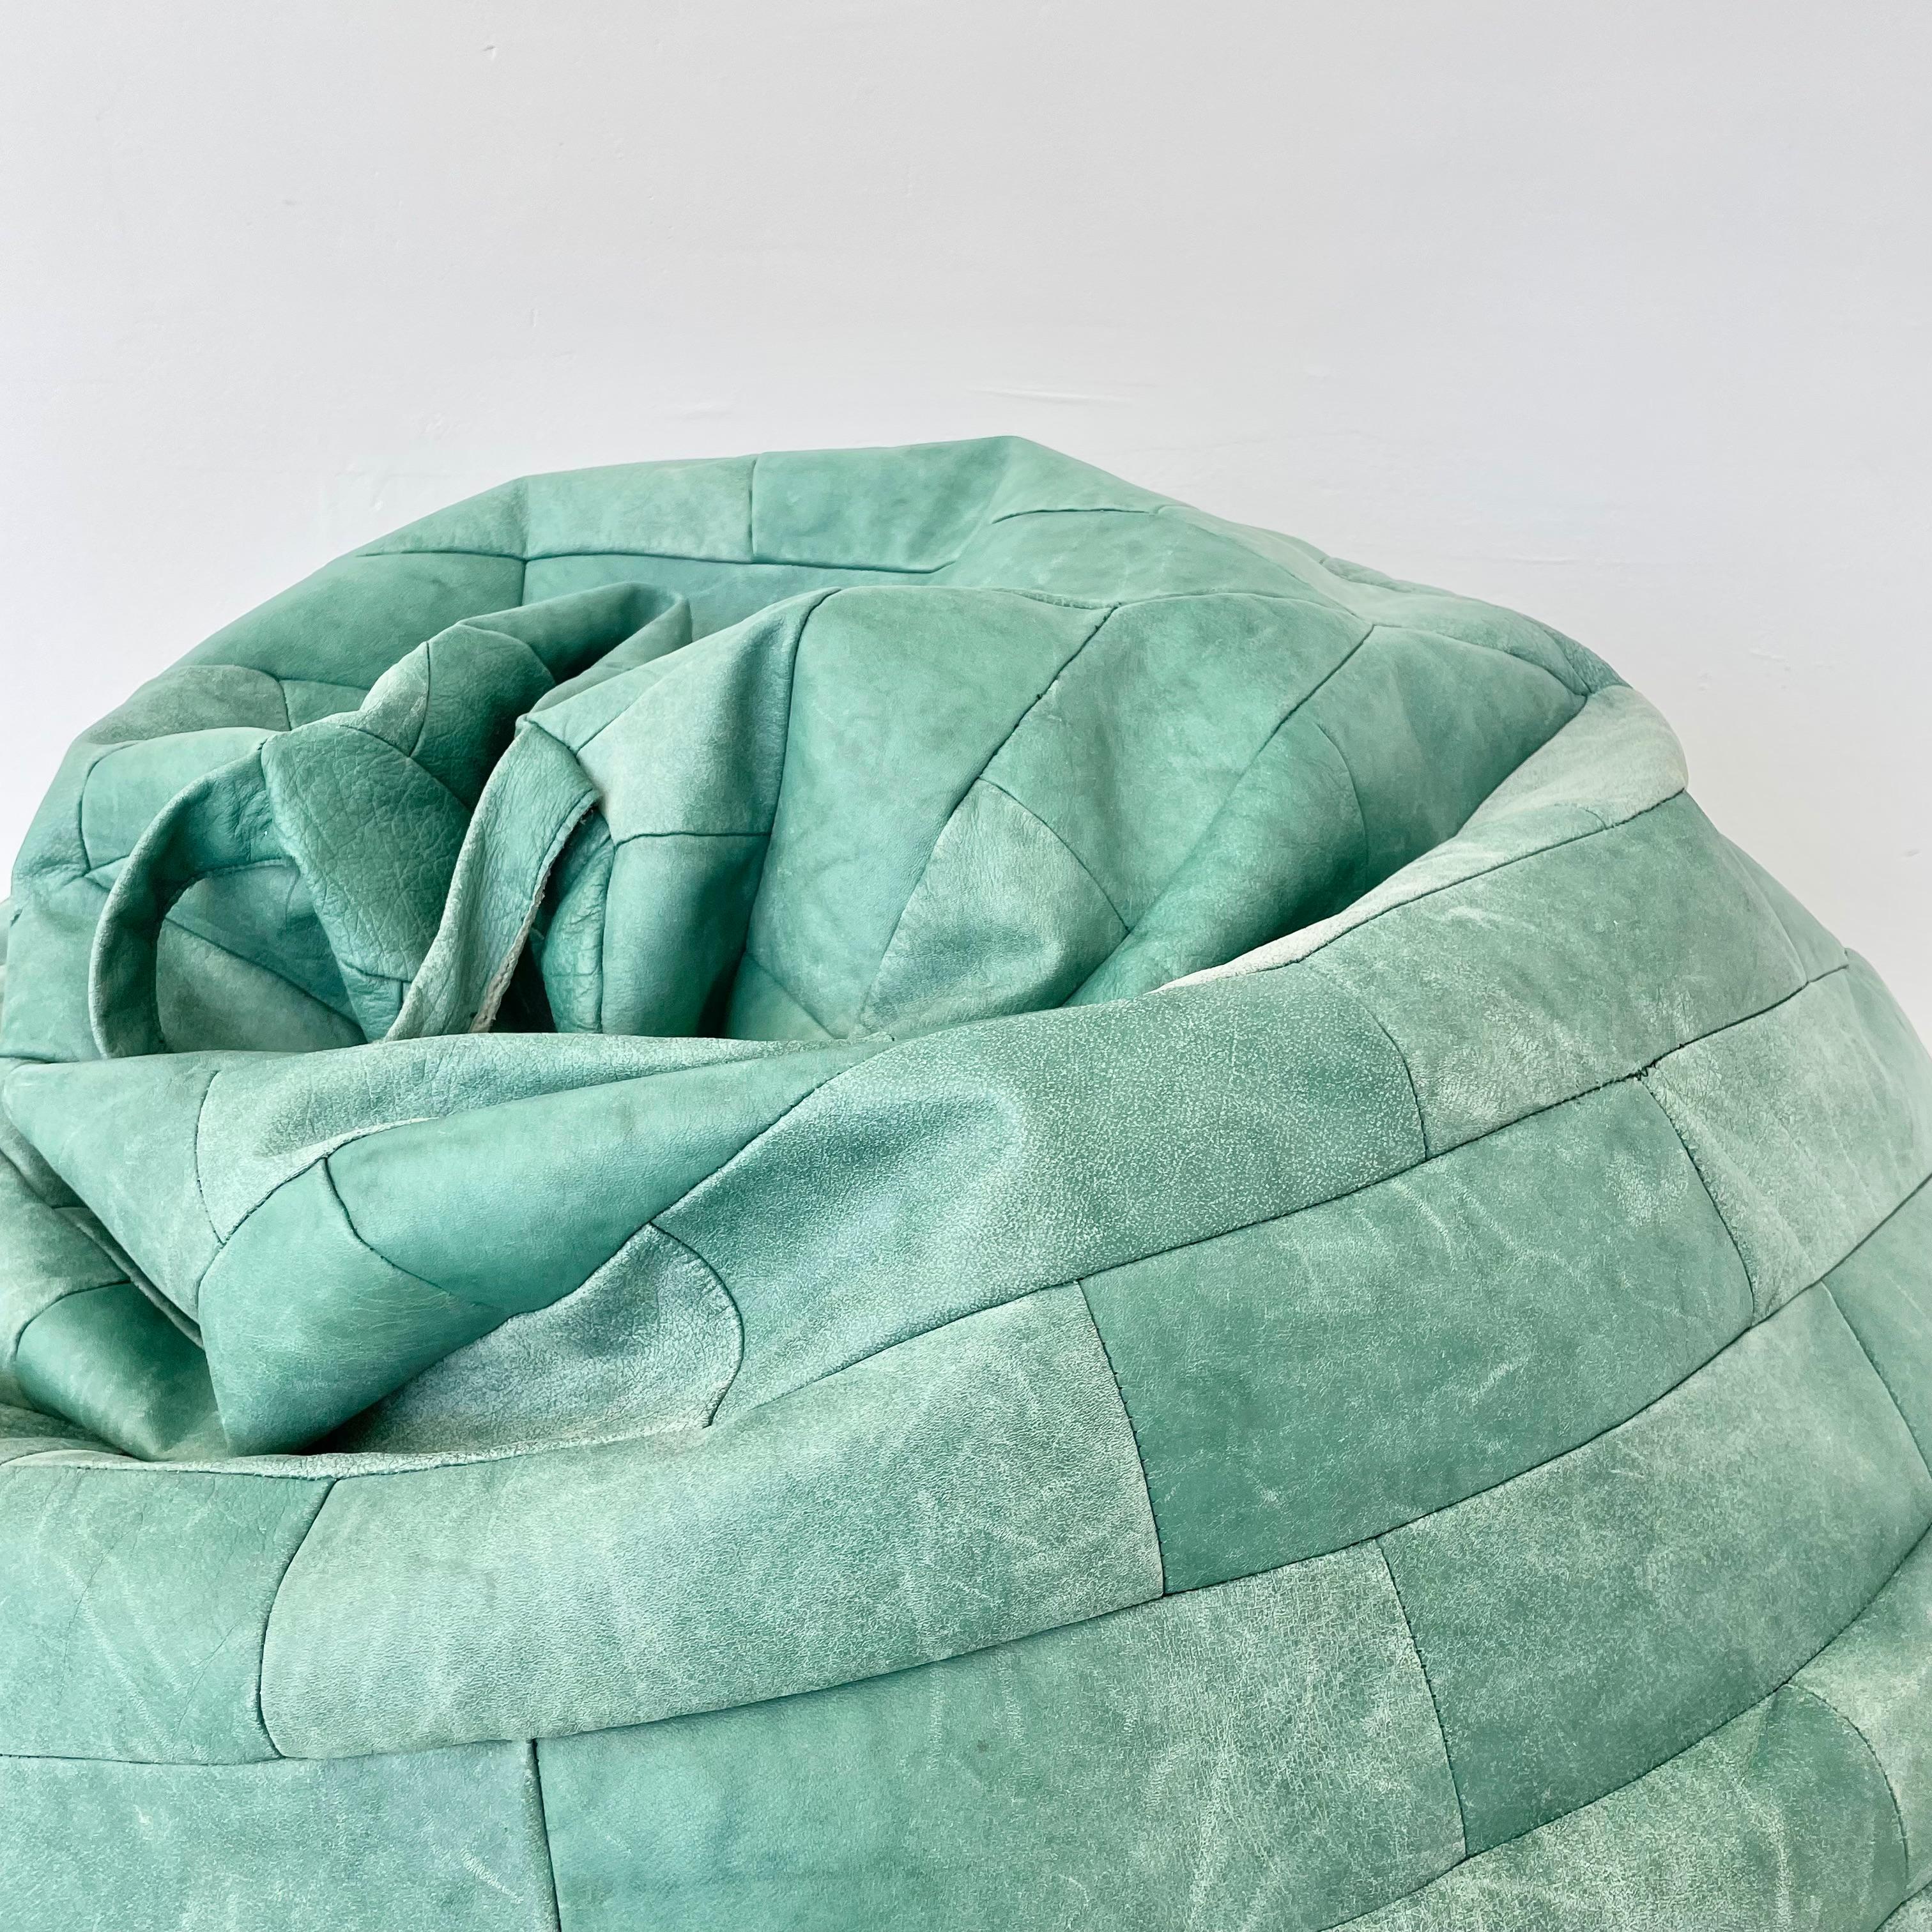  Green Patchwork Leather Bean Bag 1